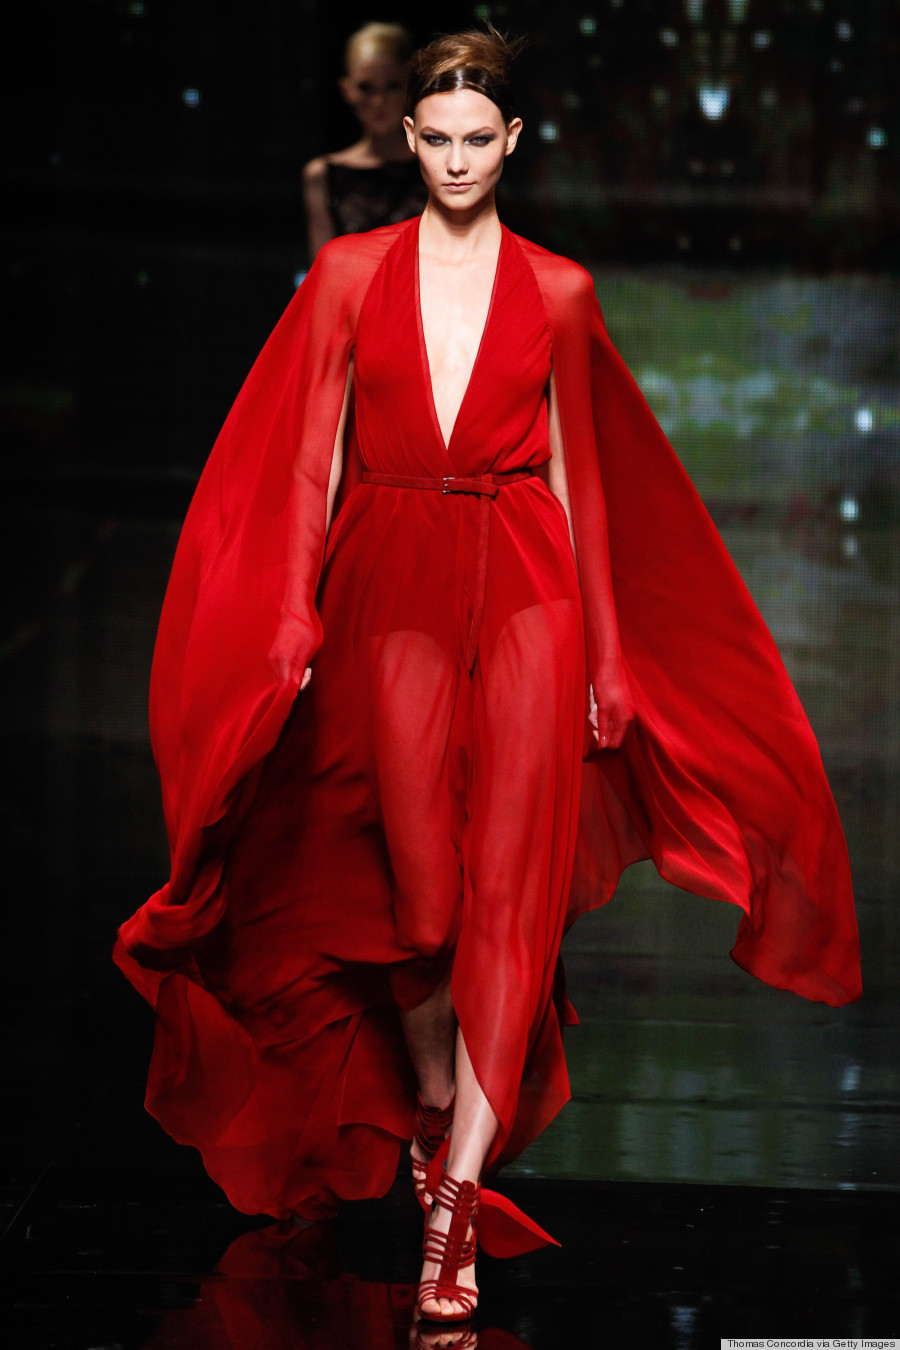 13 Of The Most Beautiful Runway Photos From New York Fashion Week Huffpost